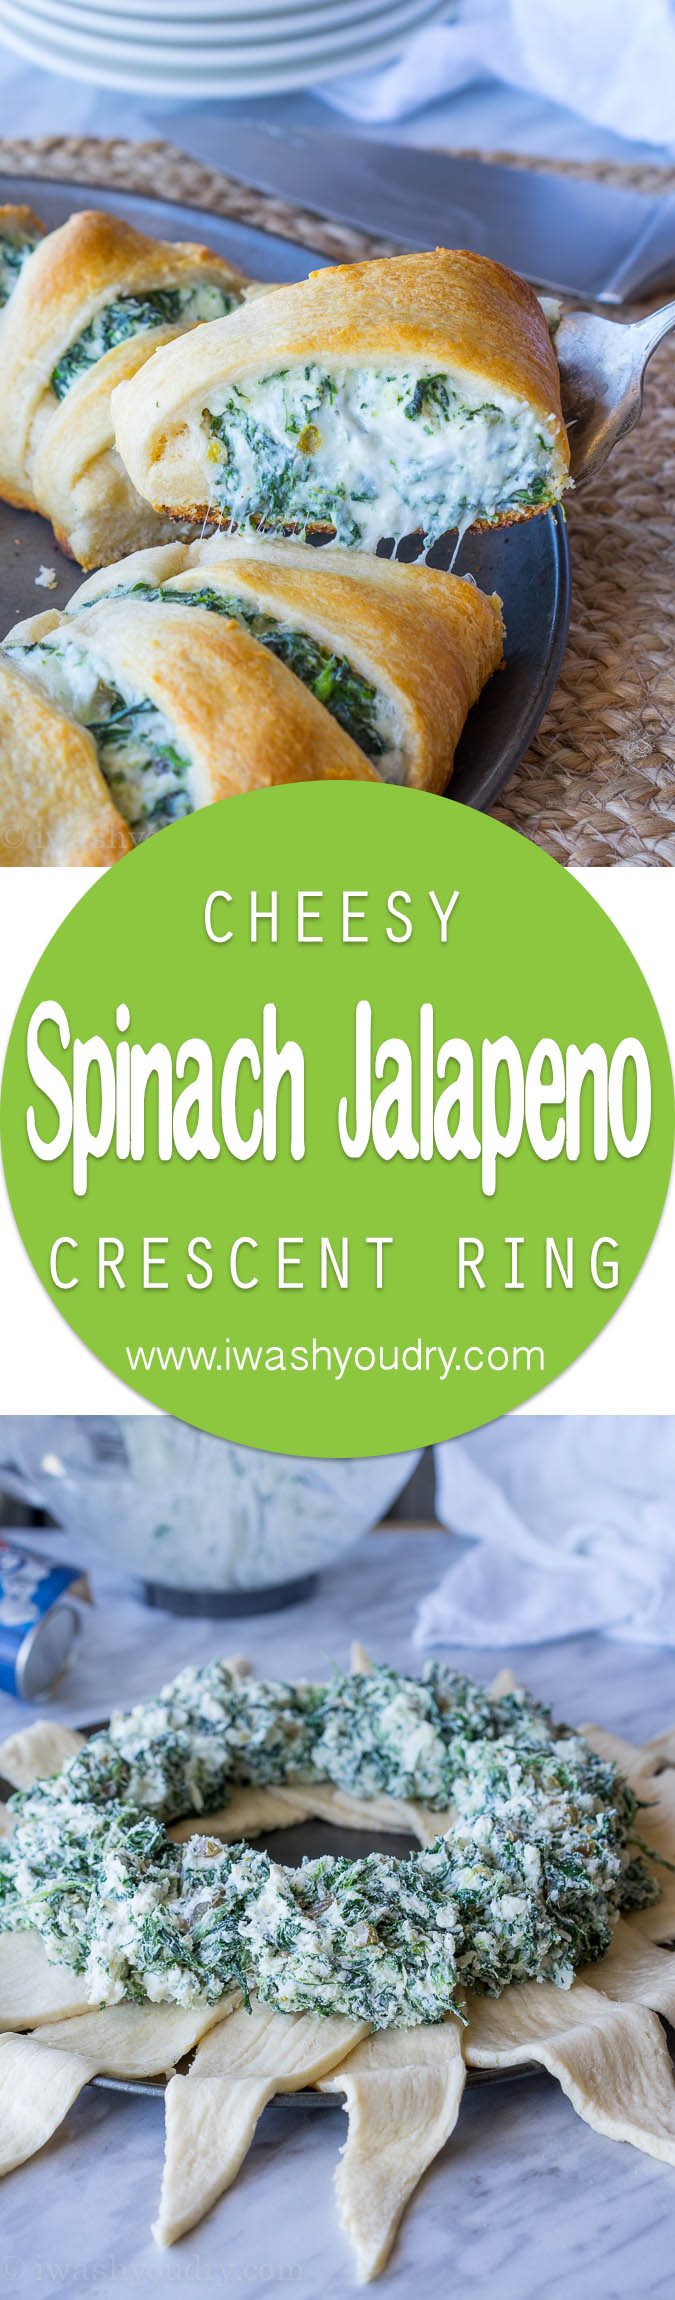 This Cheesy Spinach Jalapeño Crescent Ring is loaded with cream cheese, monterey jack cheese, spinach and diced pickled jalapeños. It's so easy to make and EVERYONE loves it! 